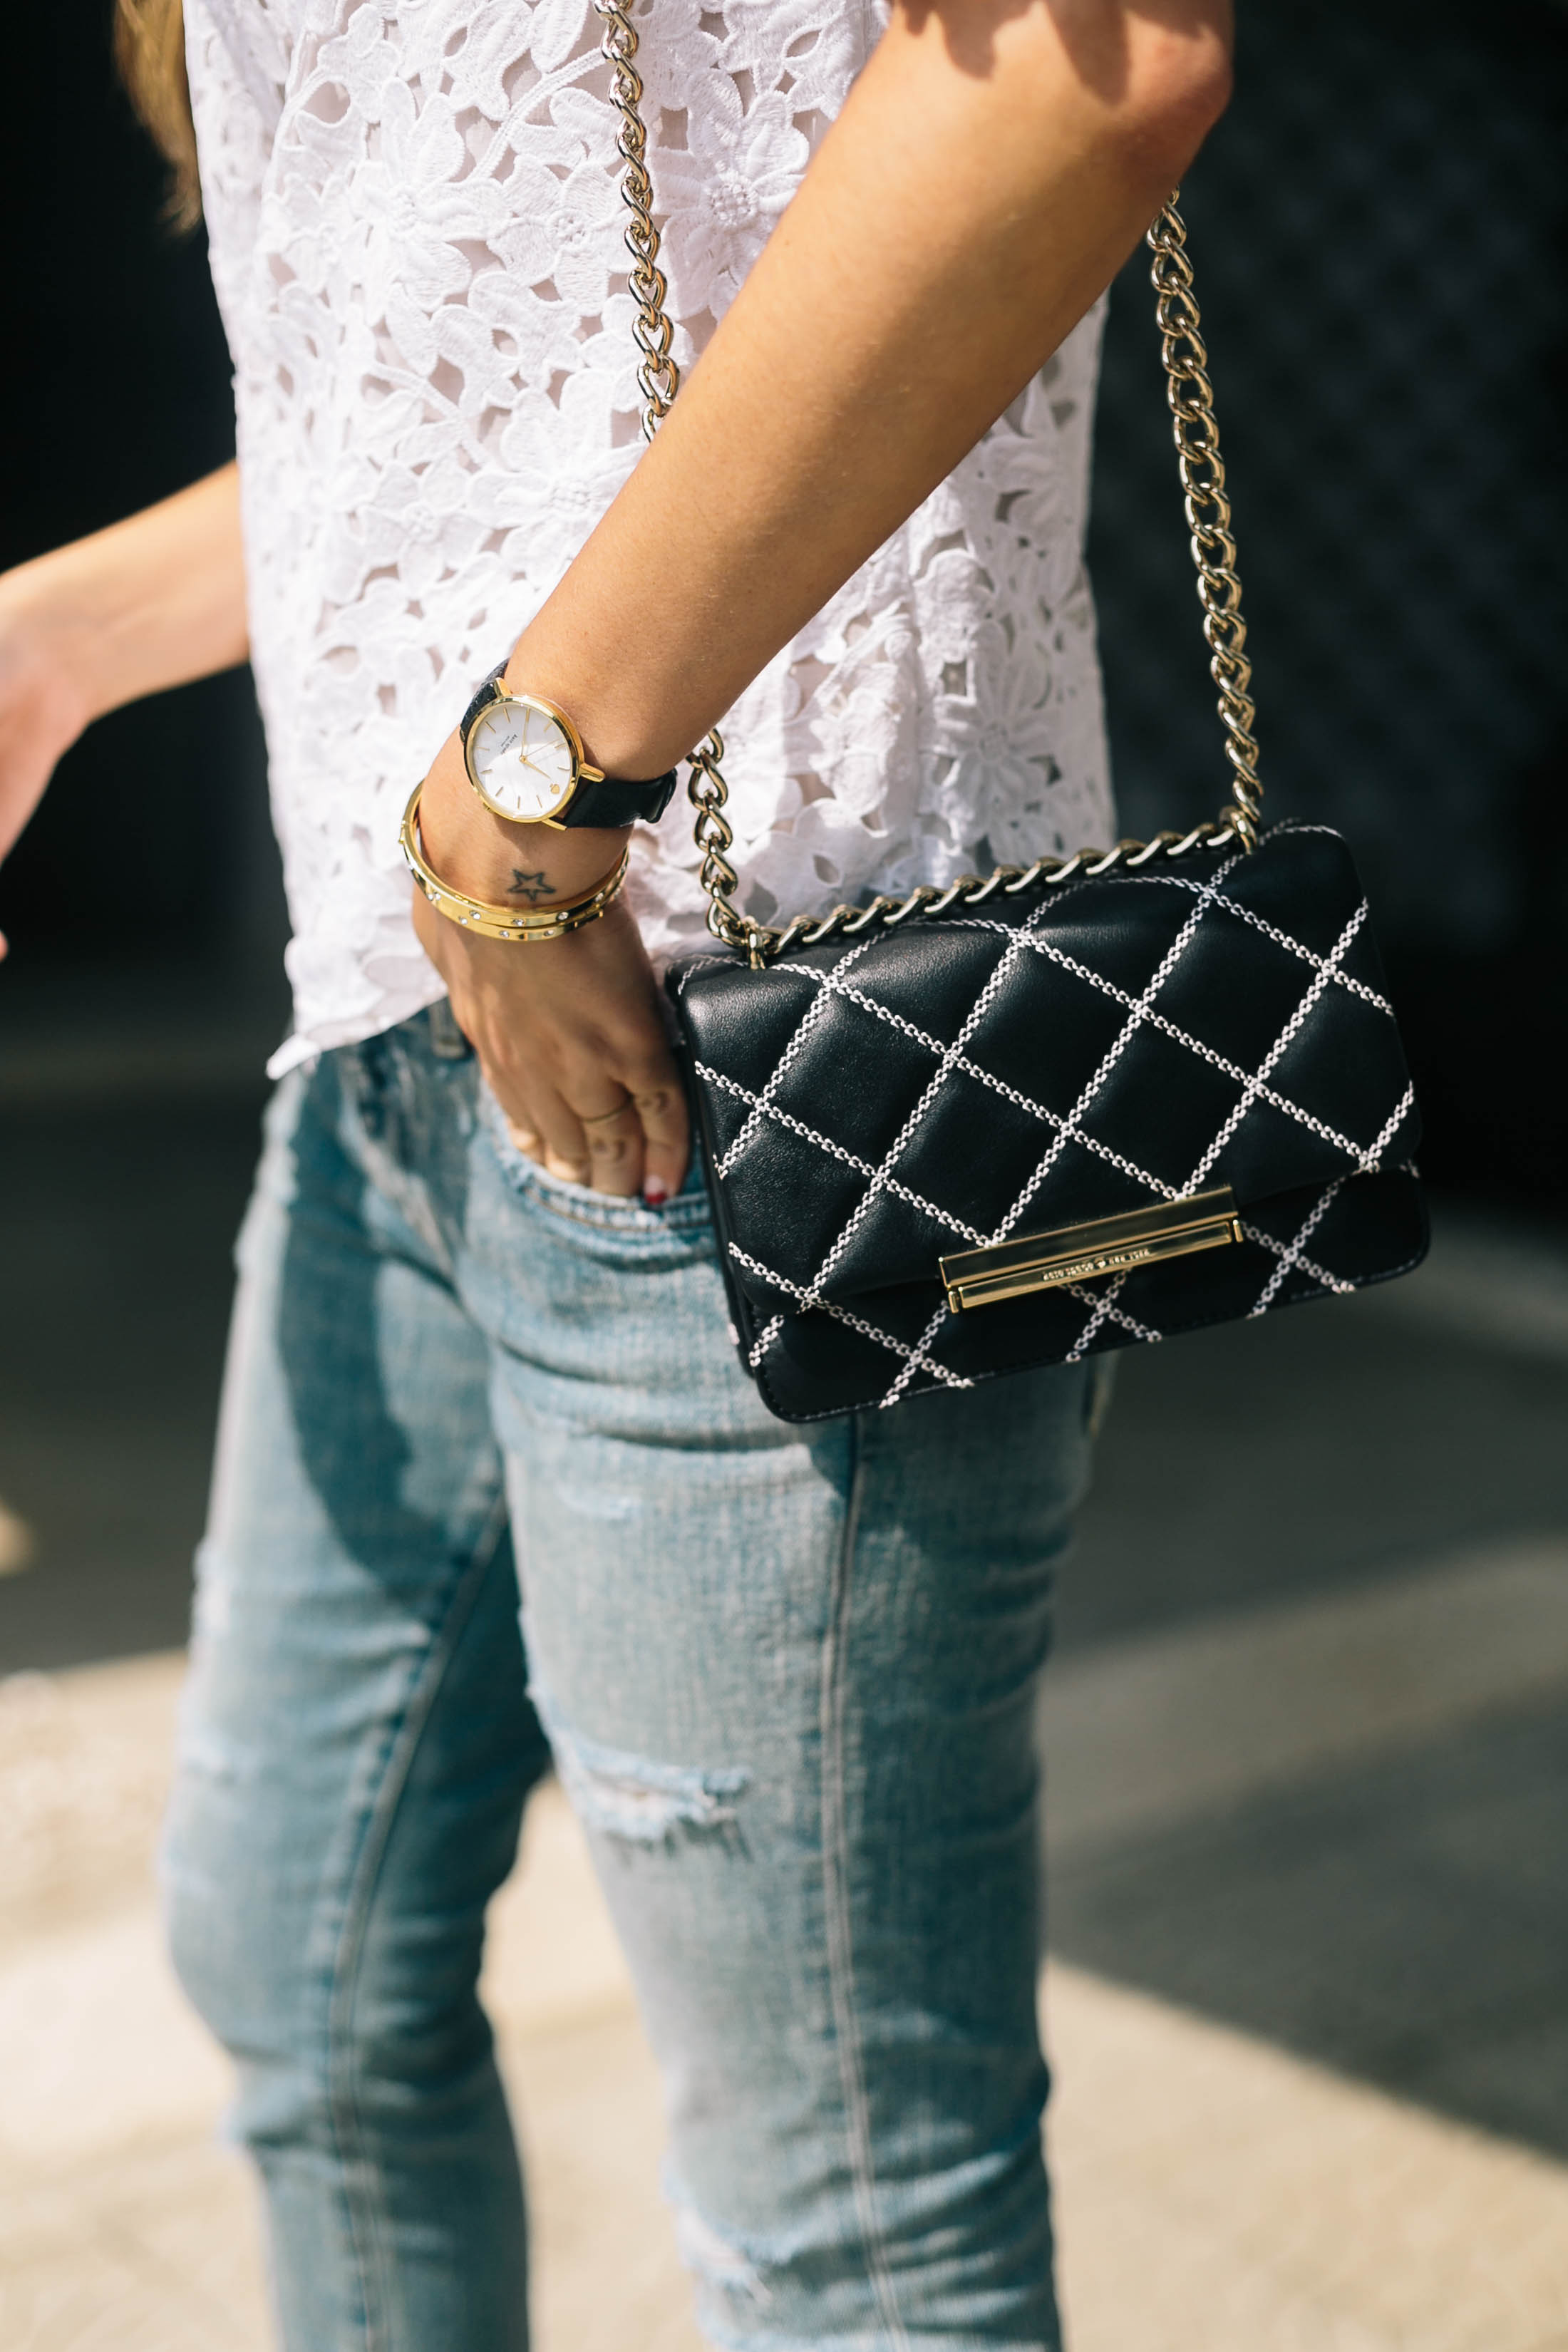 Maristella's outfit details: lace, denim, black leather quilted shoulder bag, minimalist watch and gold bangles over a dainty star tattoo